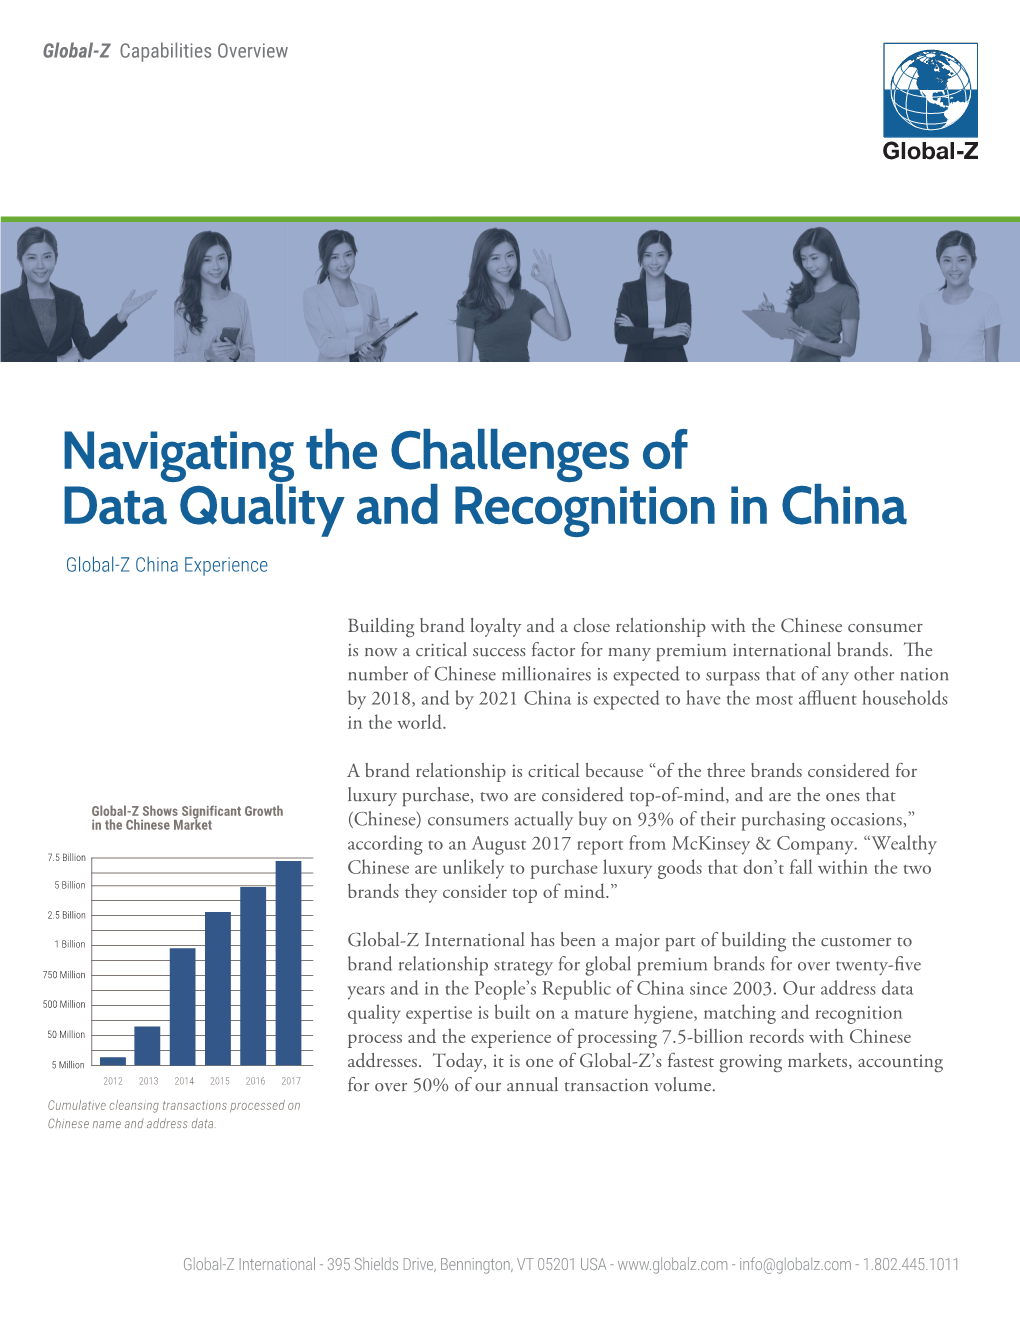 Navigating the Challenges of Data Quality and Recognition in China Global-Z China Experience